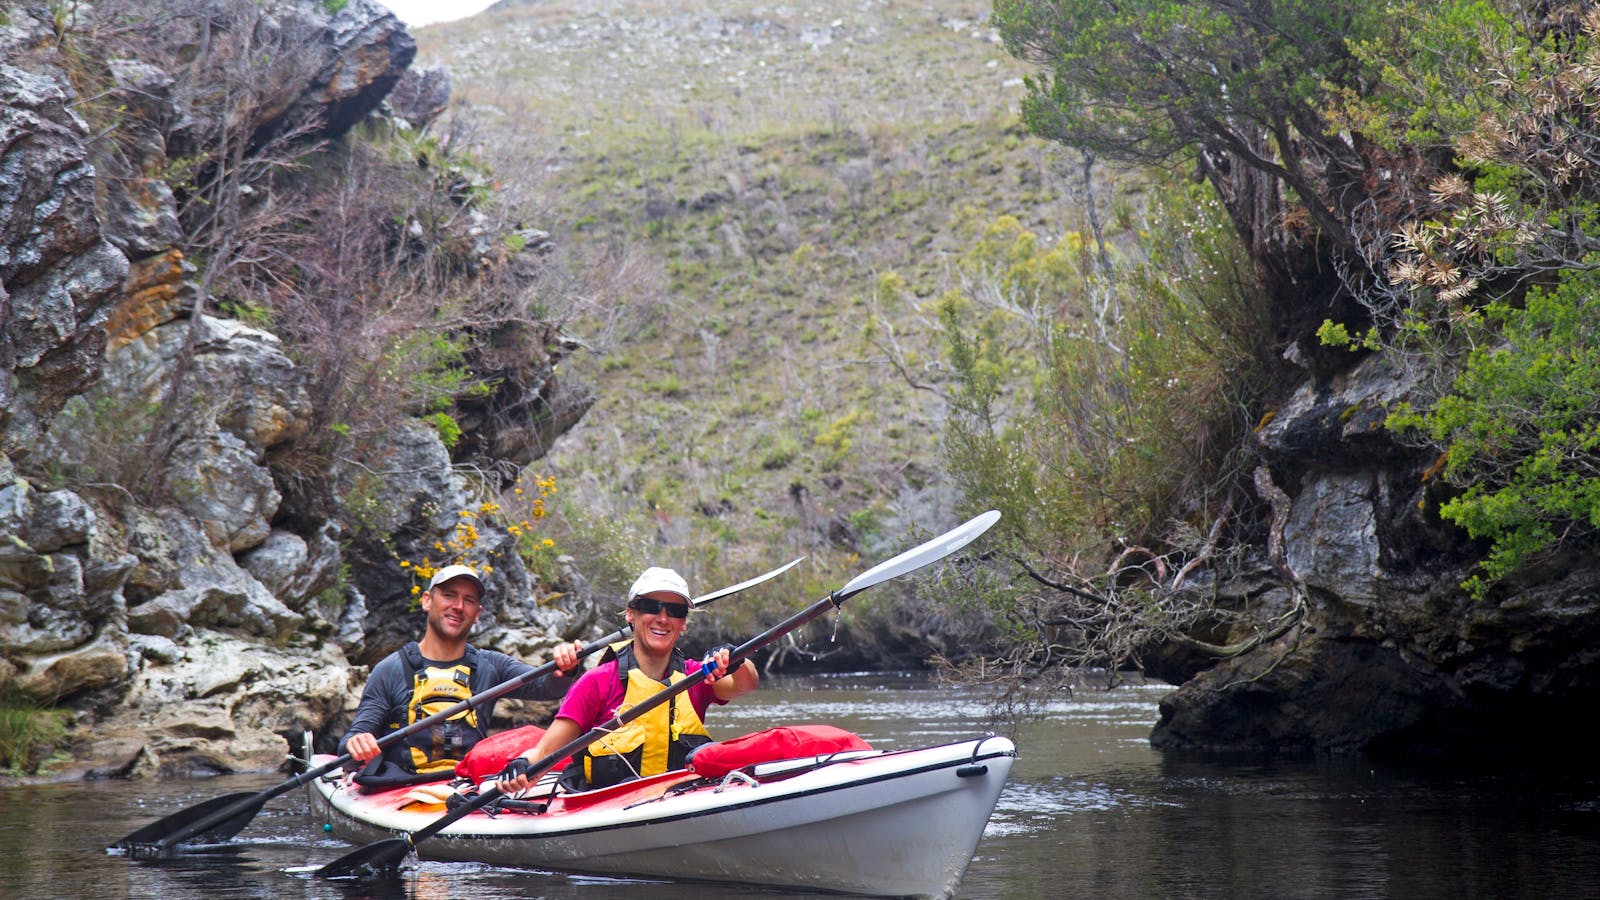 Kayakers on a remote river in Southwest Tasmania